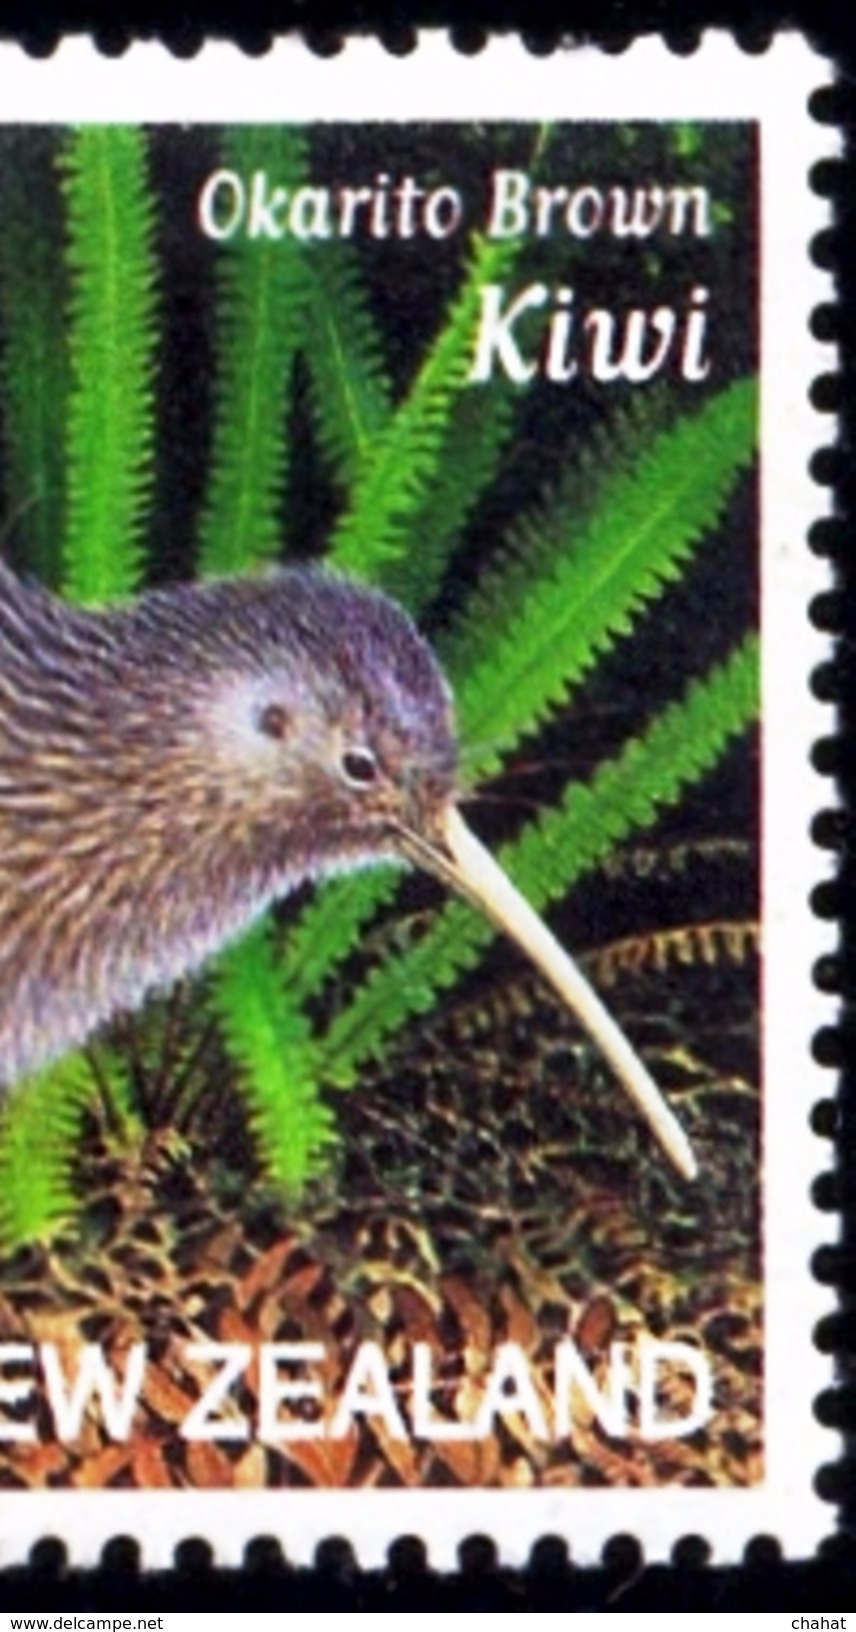 FLIGHTLESS BIRDS-KIWI-COLOR SEPARATION-ERROR-TRIALS-SET OF 5-JOINT ISSUE WITH FRANCE-NEW ZEALAND-2000-SG-2375-MNH-PA-06 - Kiwis